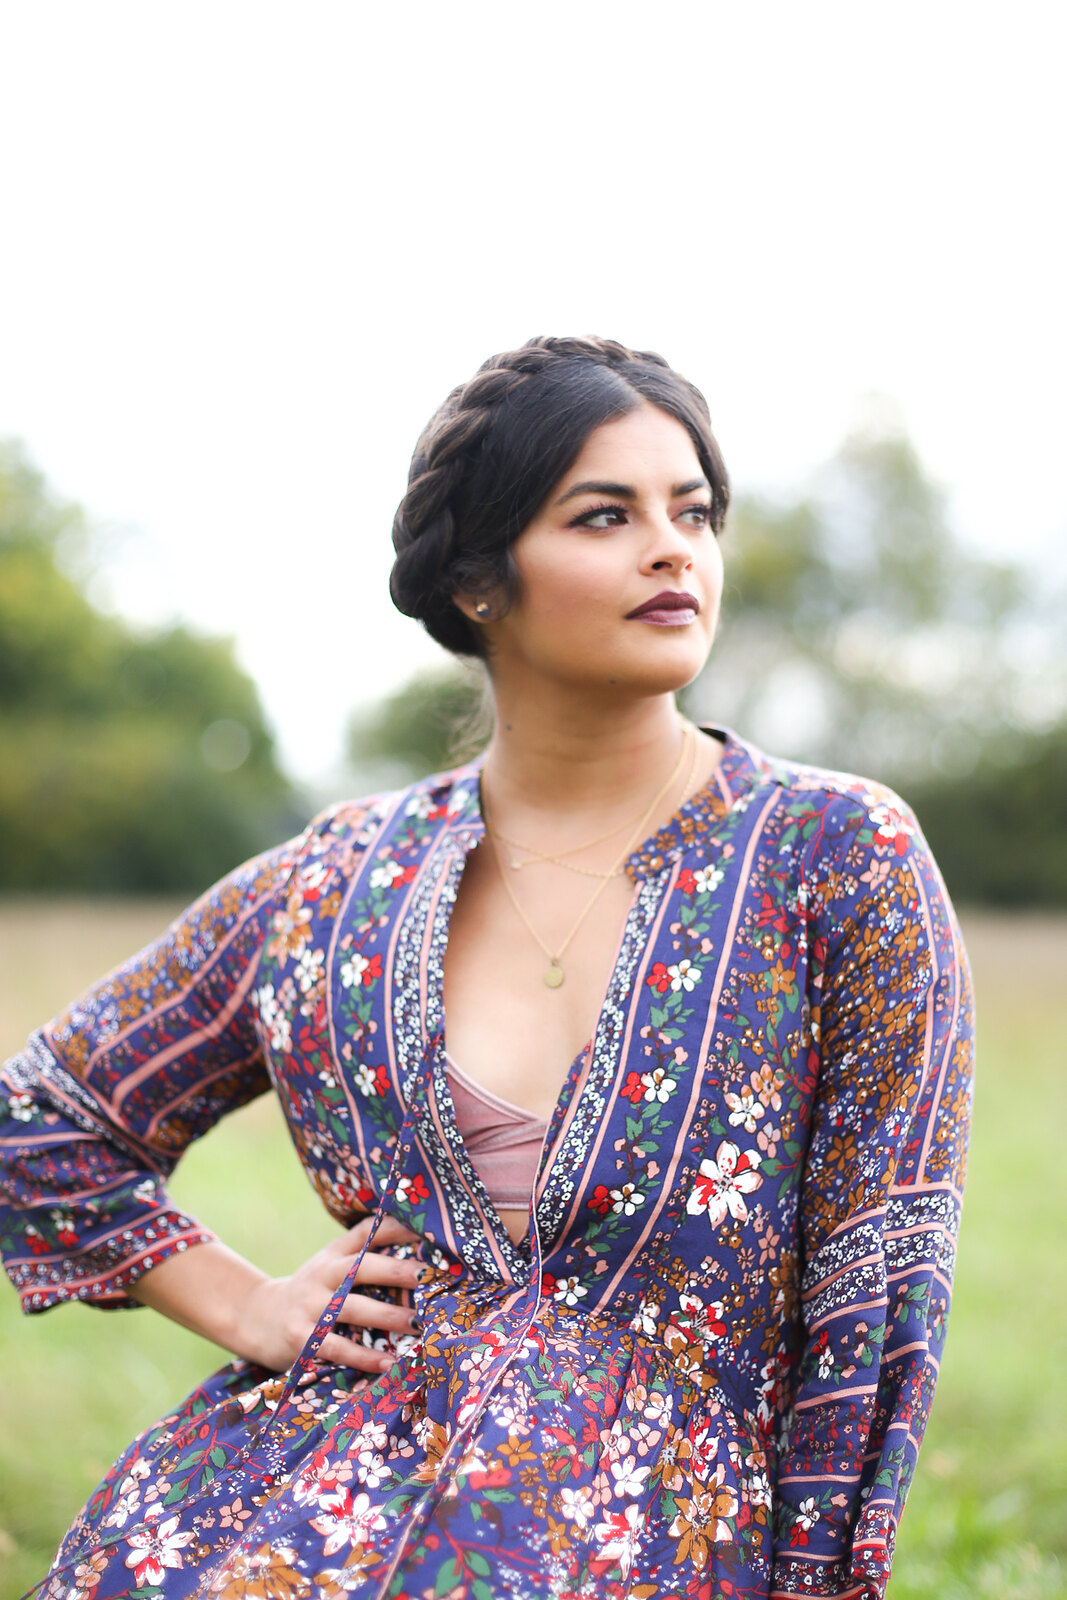 Priya the Blog, Nashville style blog, Nashville style blogger, Nashville fashion blog, Nashville fashion blogger, Vinnie Louise Nashville, ColourPop Lippie Stix in Lumiere, stackable necklaces, Fall outfit, how to wear a floral maxi dress, Rag & Bone Harrow booties, Fall outfit with floral maxi dress